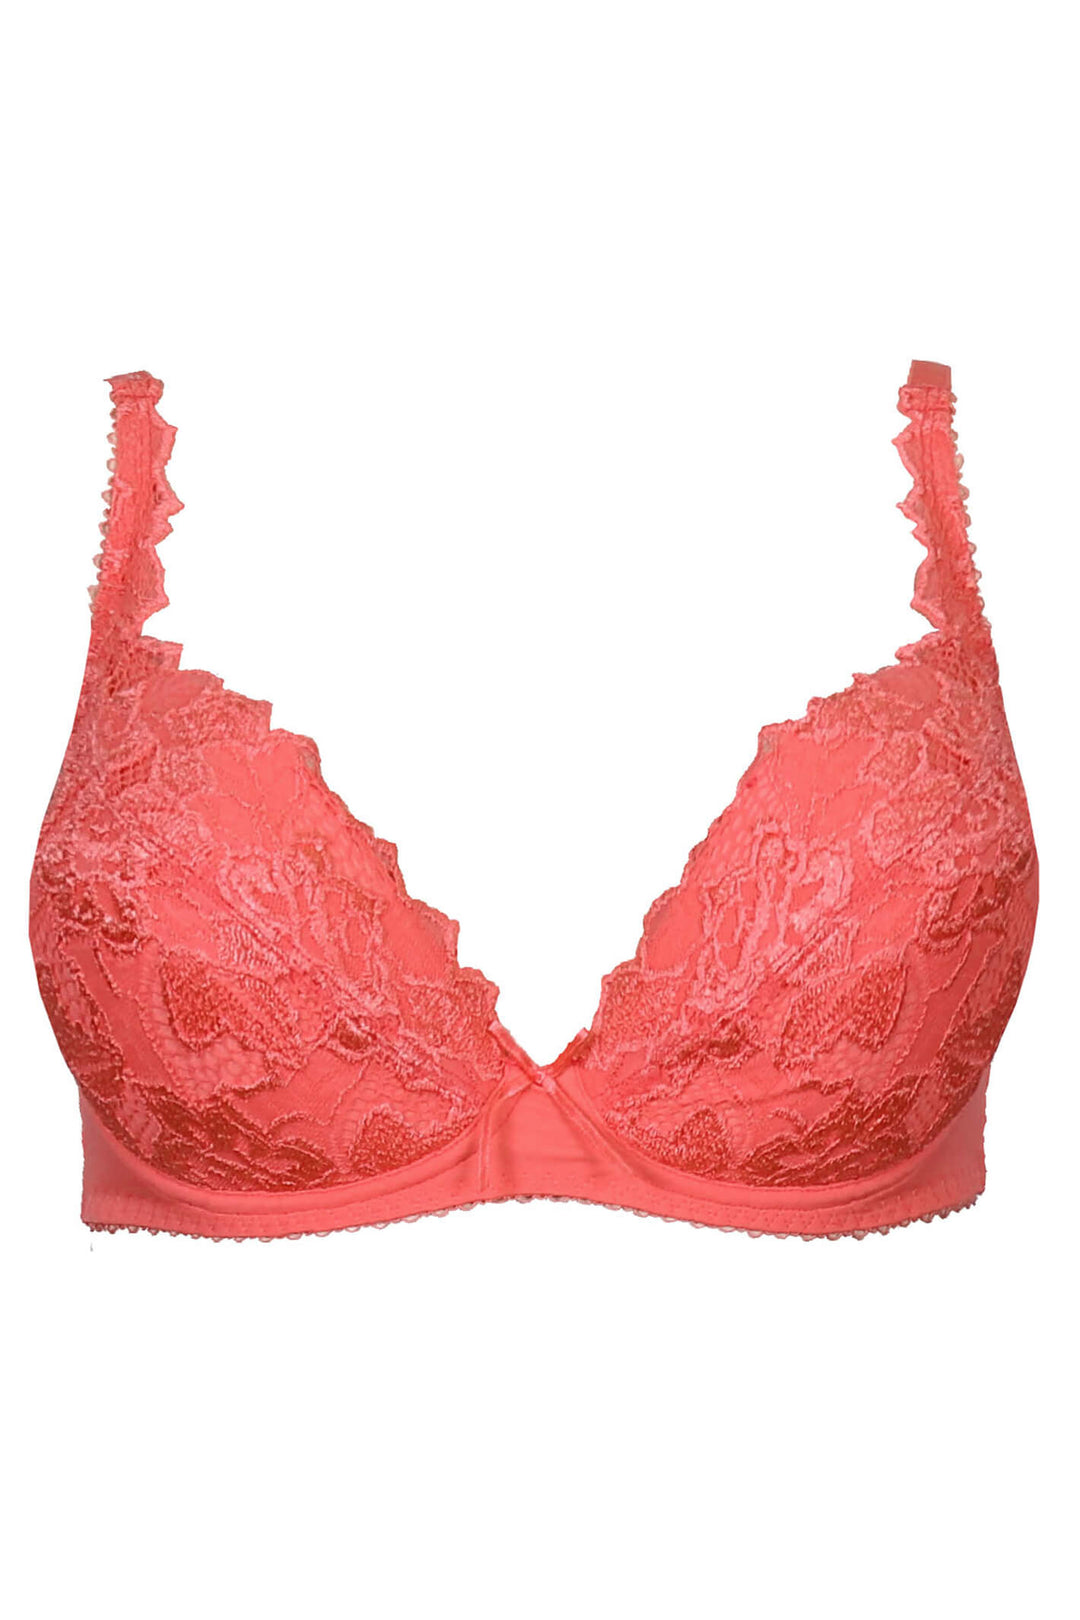 Lepel 93200 Fiore Coral Padded Plunge Bra - Shirley Allum Boutique